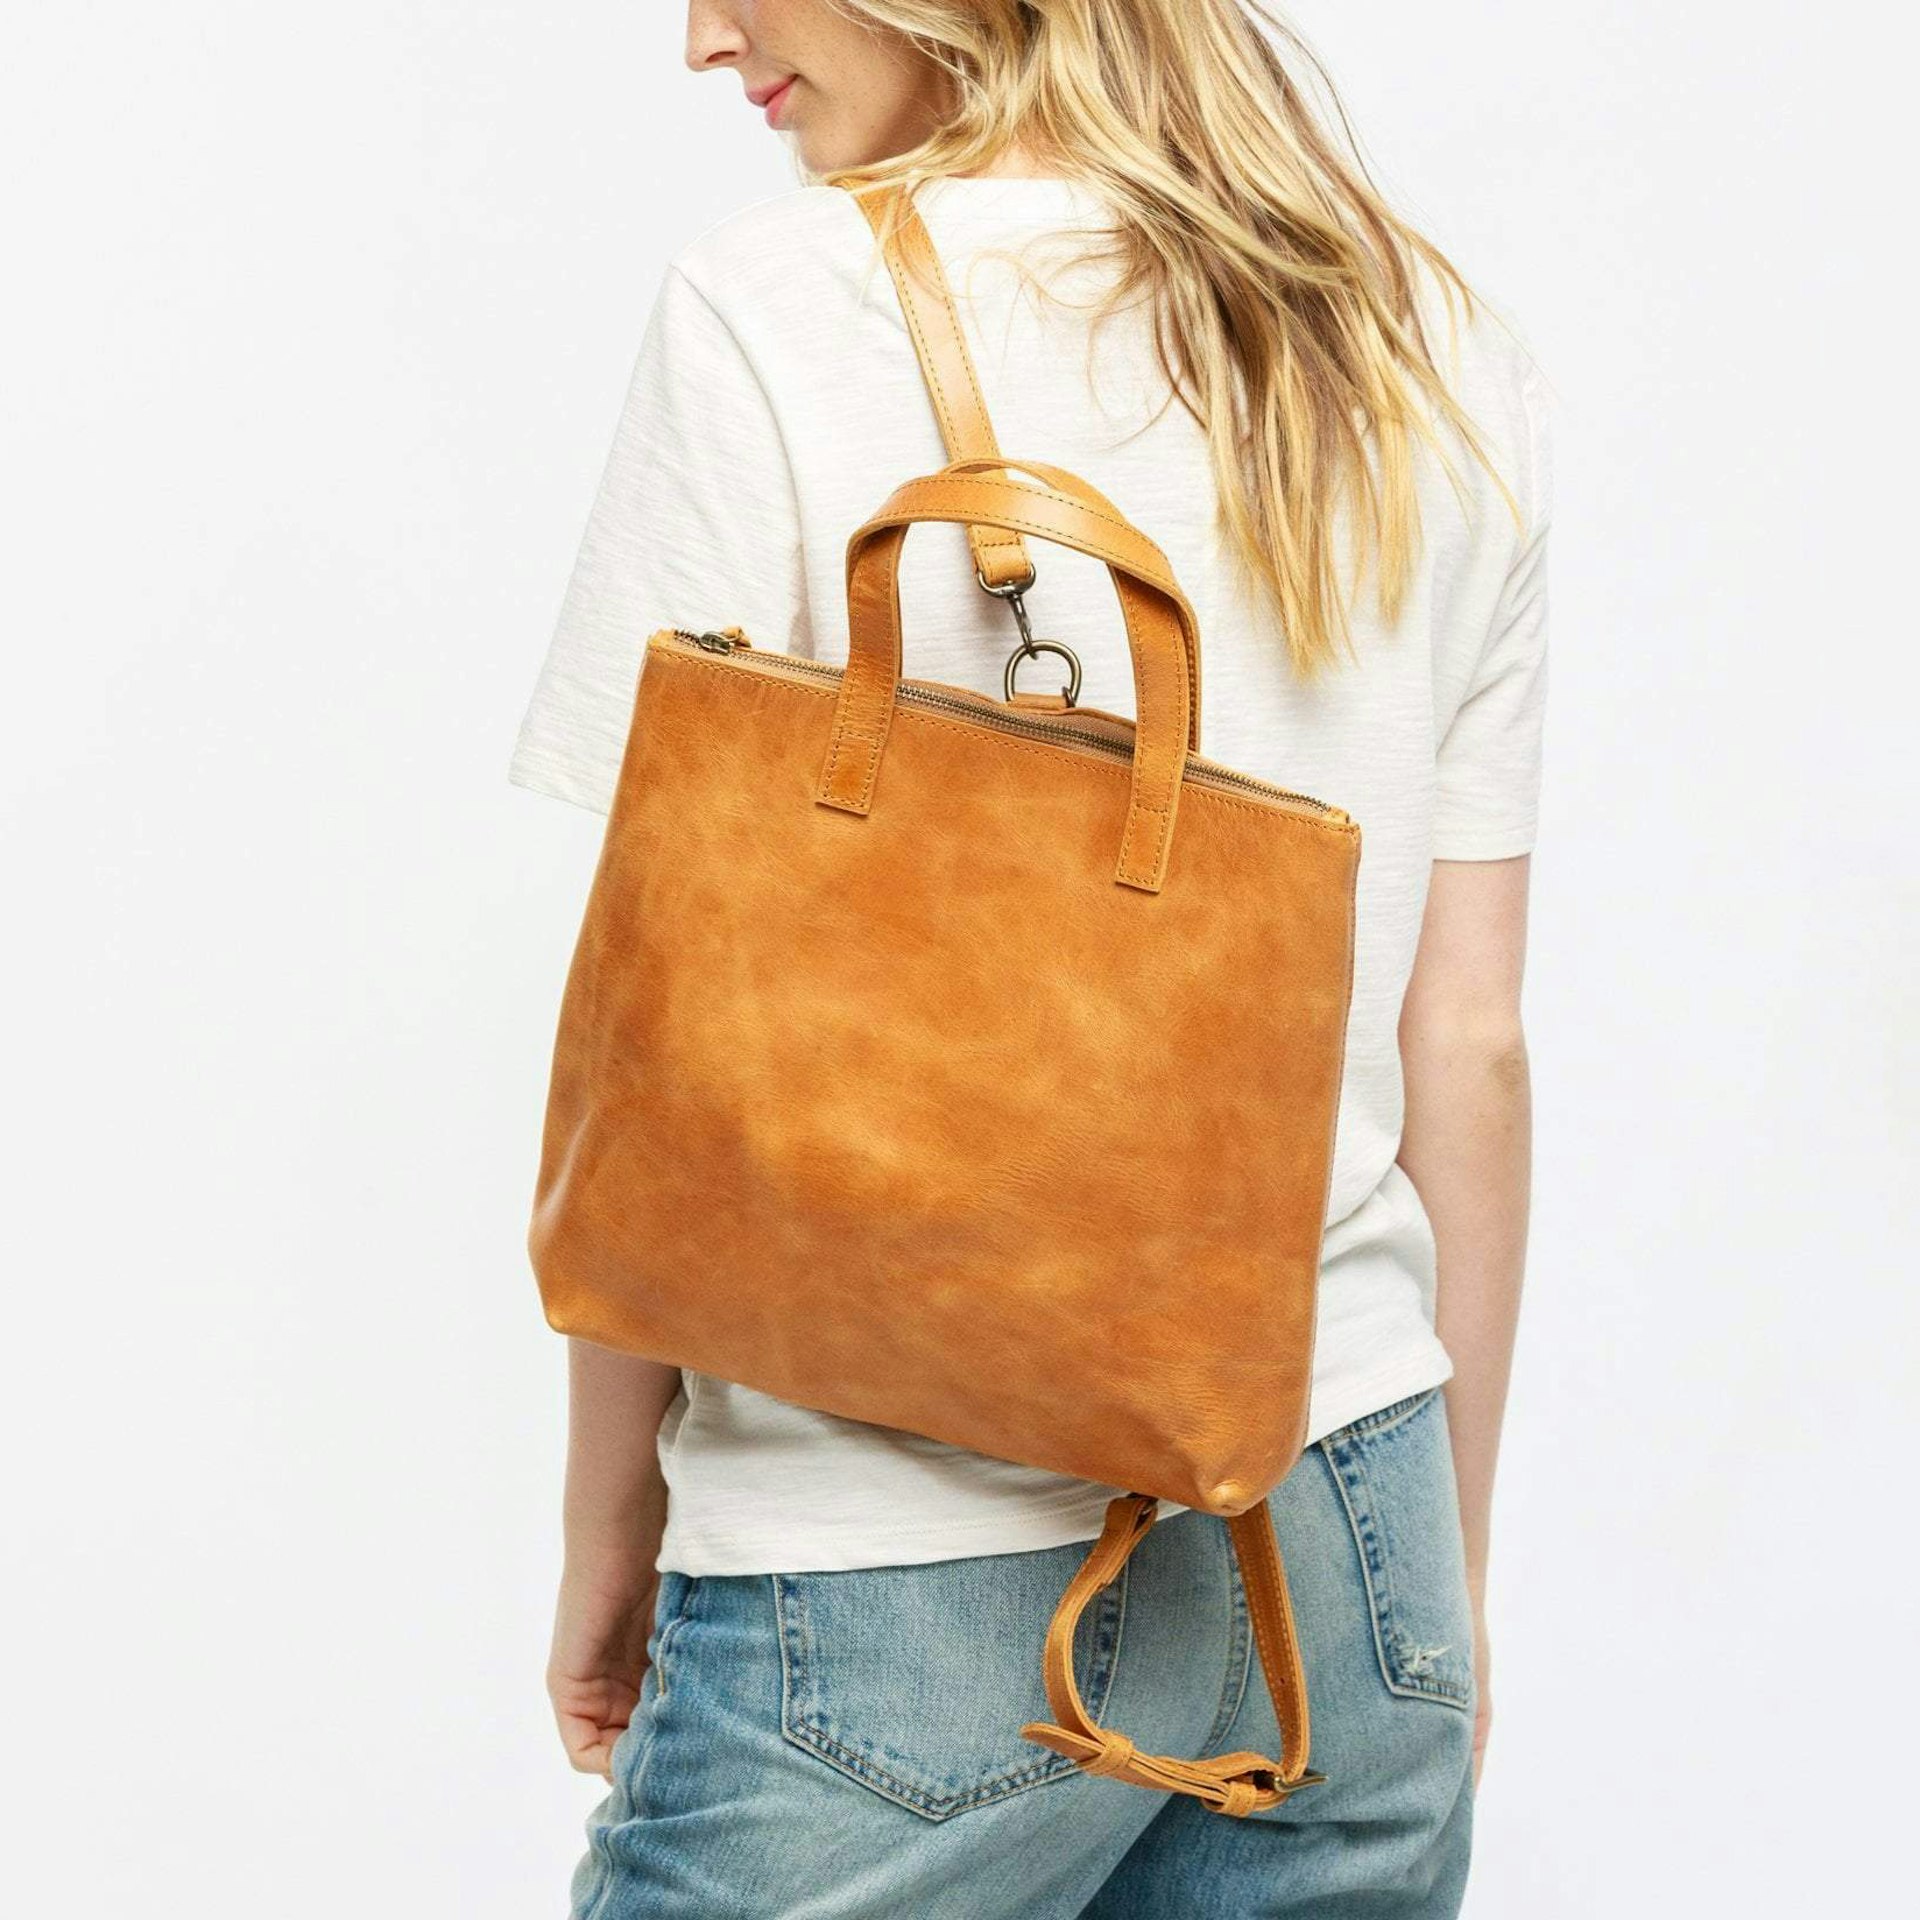 A blond woman in a white shirt seen from the back, wearing Able's Abera convertible backpack in camel over one shoulder